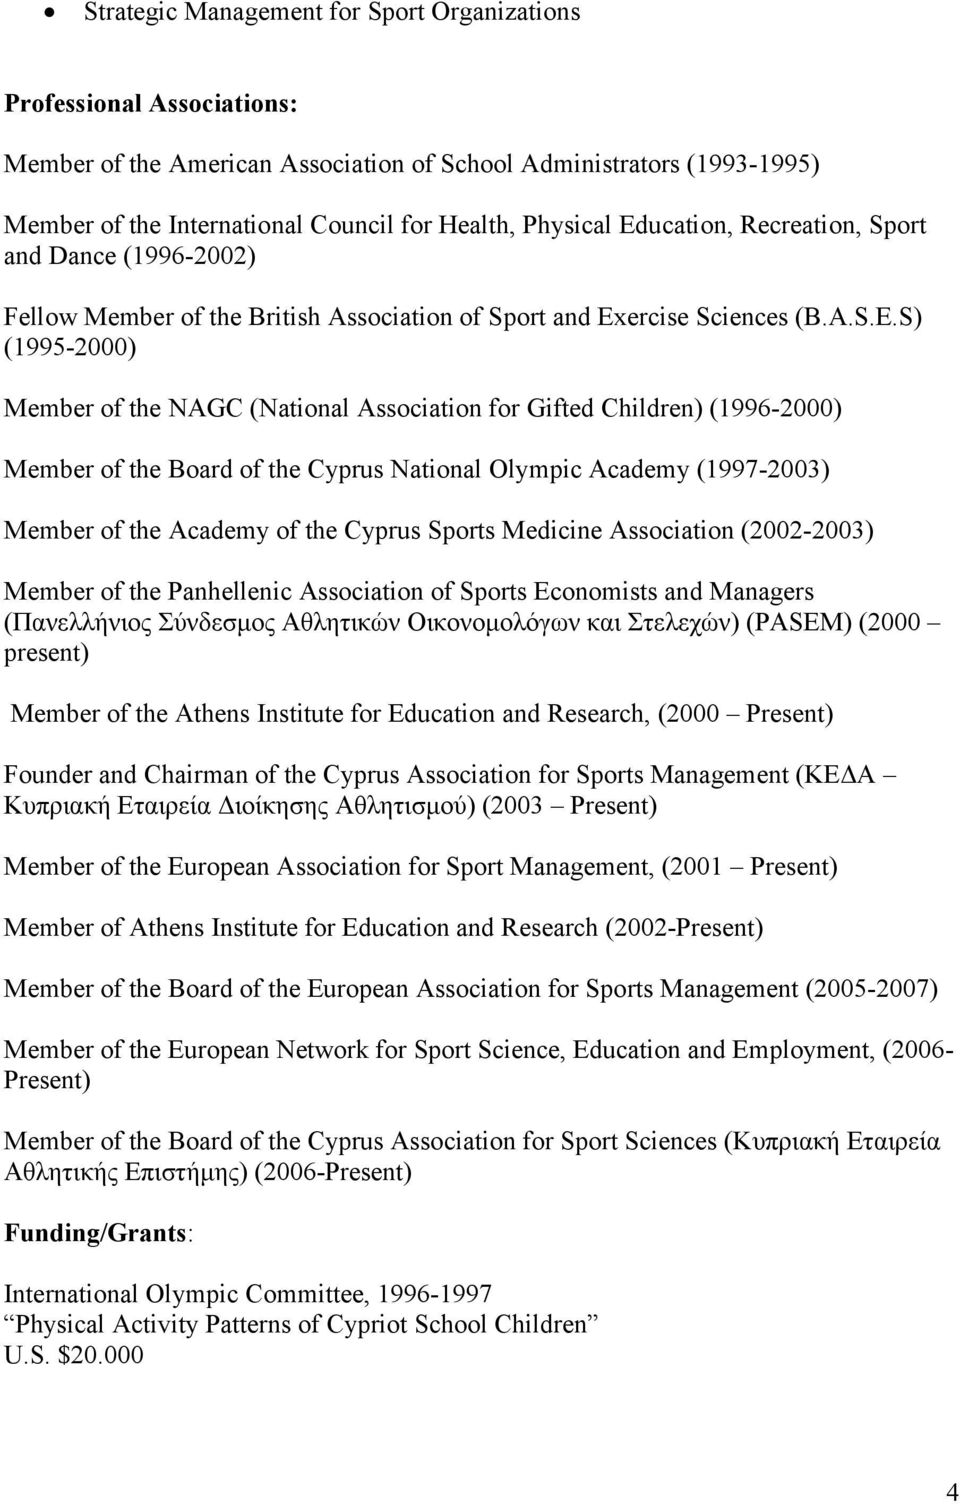 ucation, Recreation, Sport and Dance (1996-2002) Fellow Member of the British Association of Sport and Ex